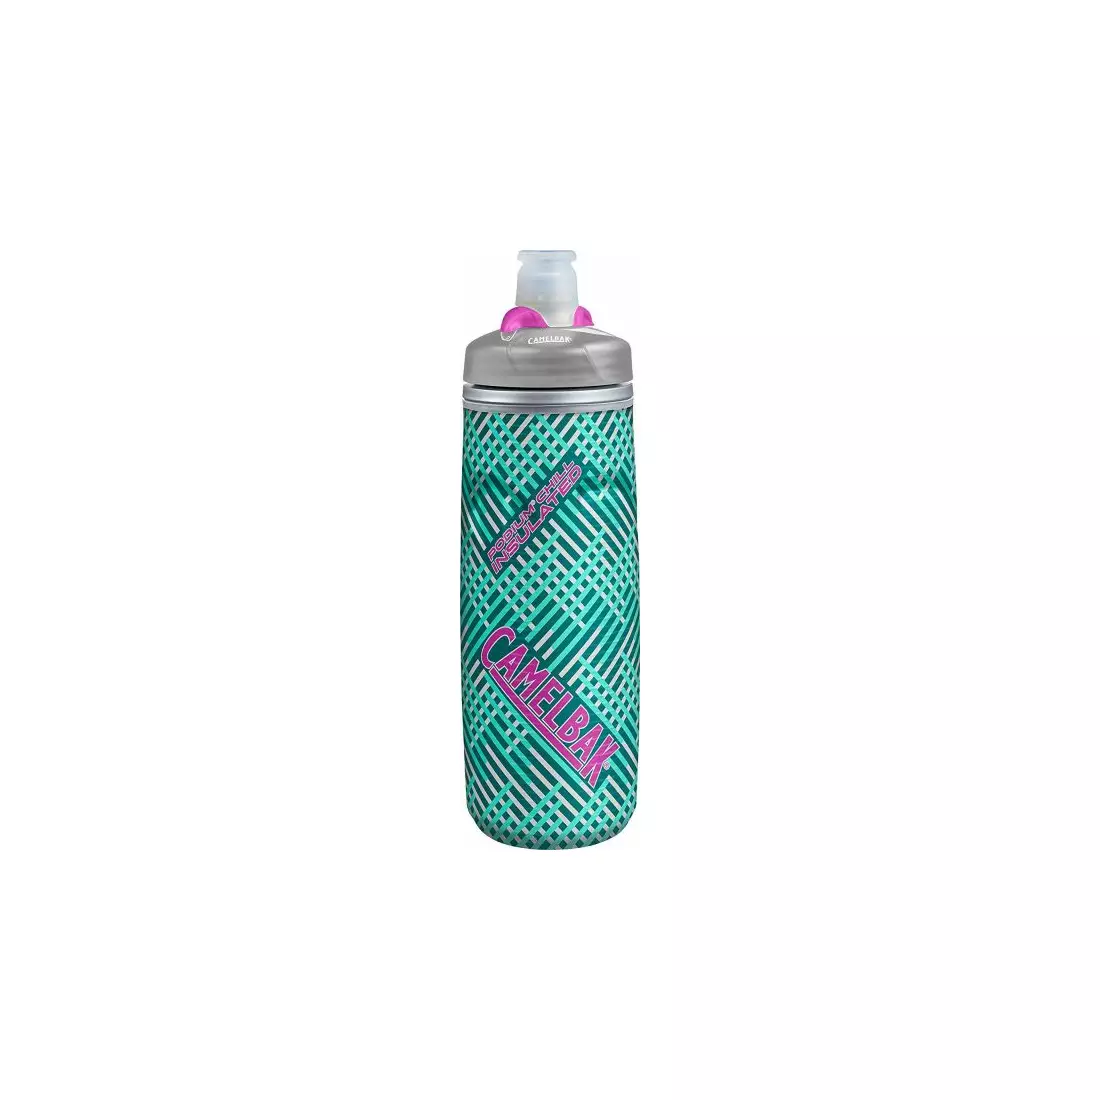 Camelbak SS18 Podium Chill Thermal Cycling Water Bottle 21oz / 620ml Anemone